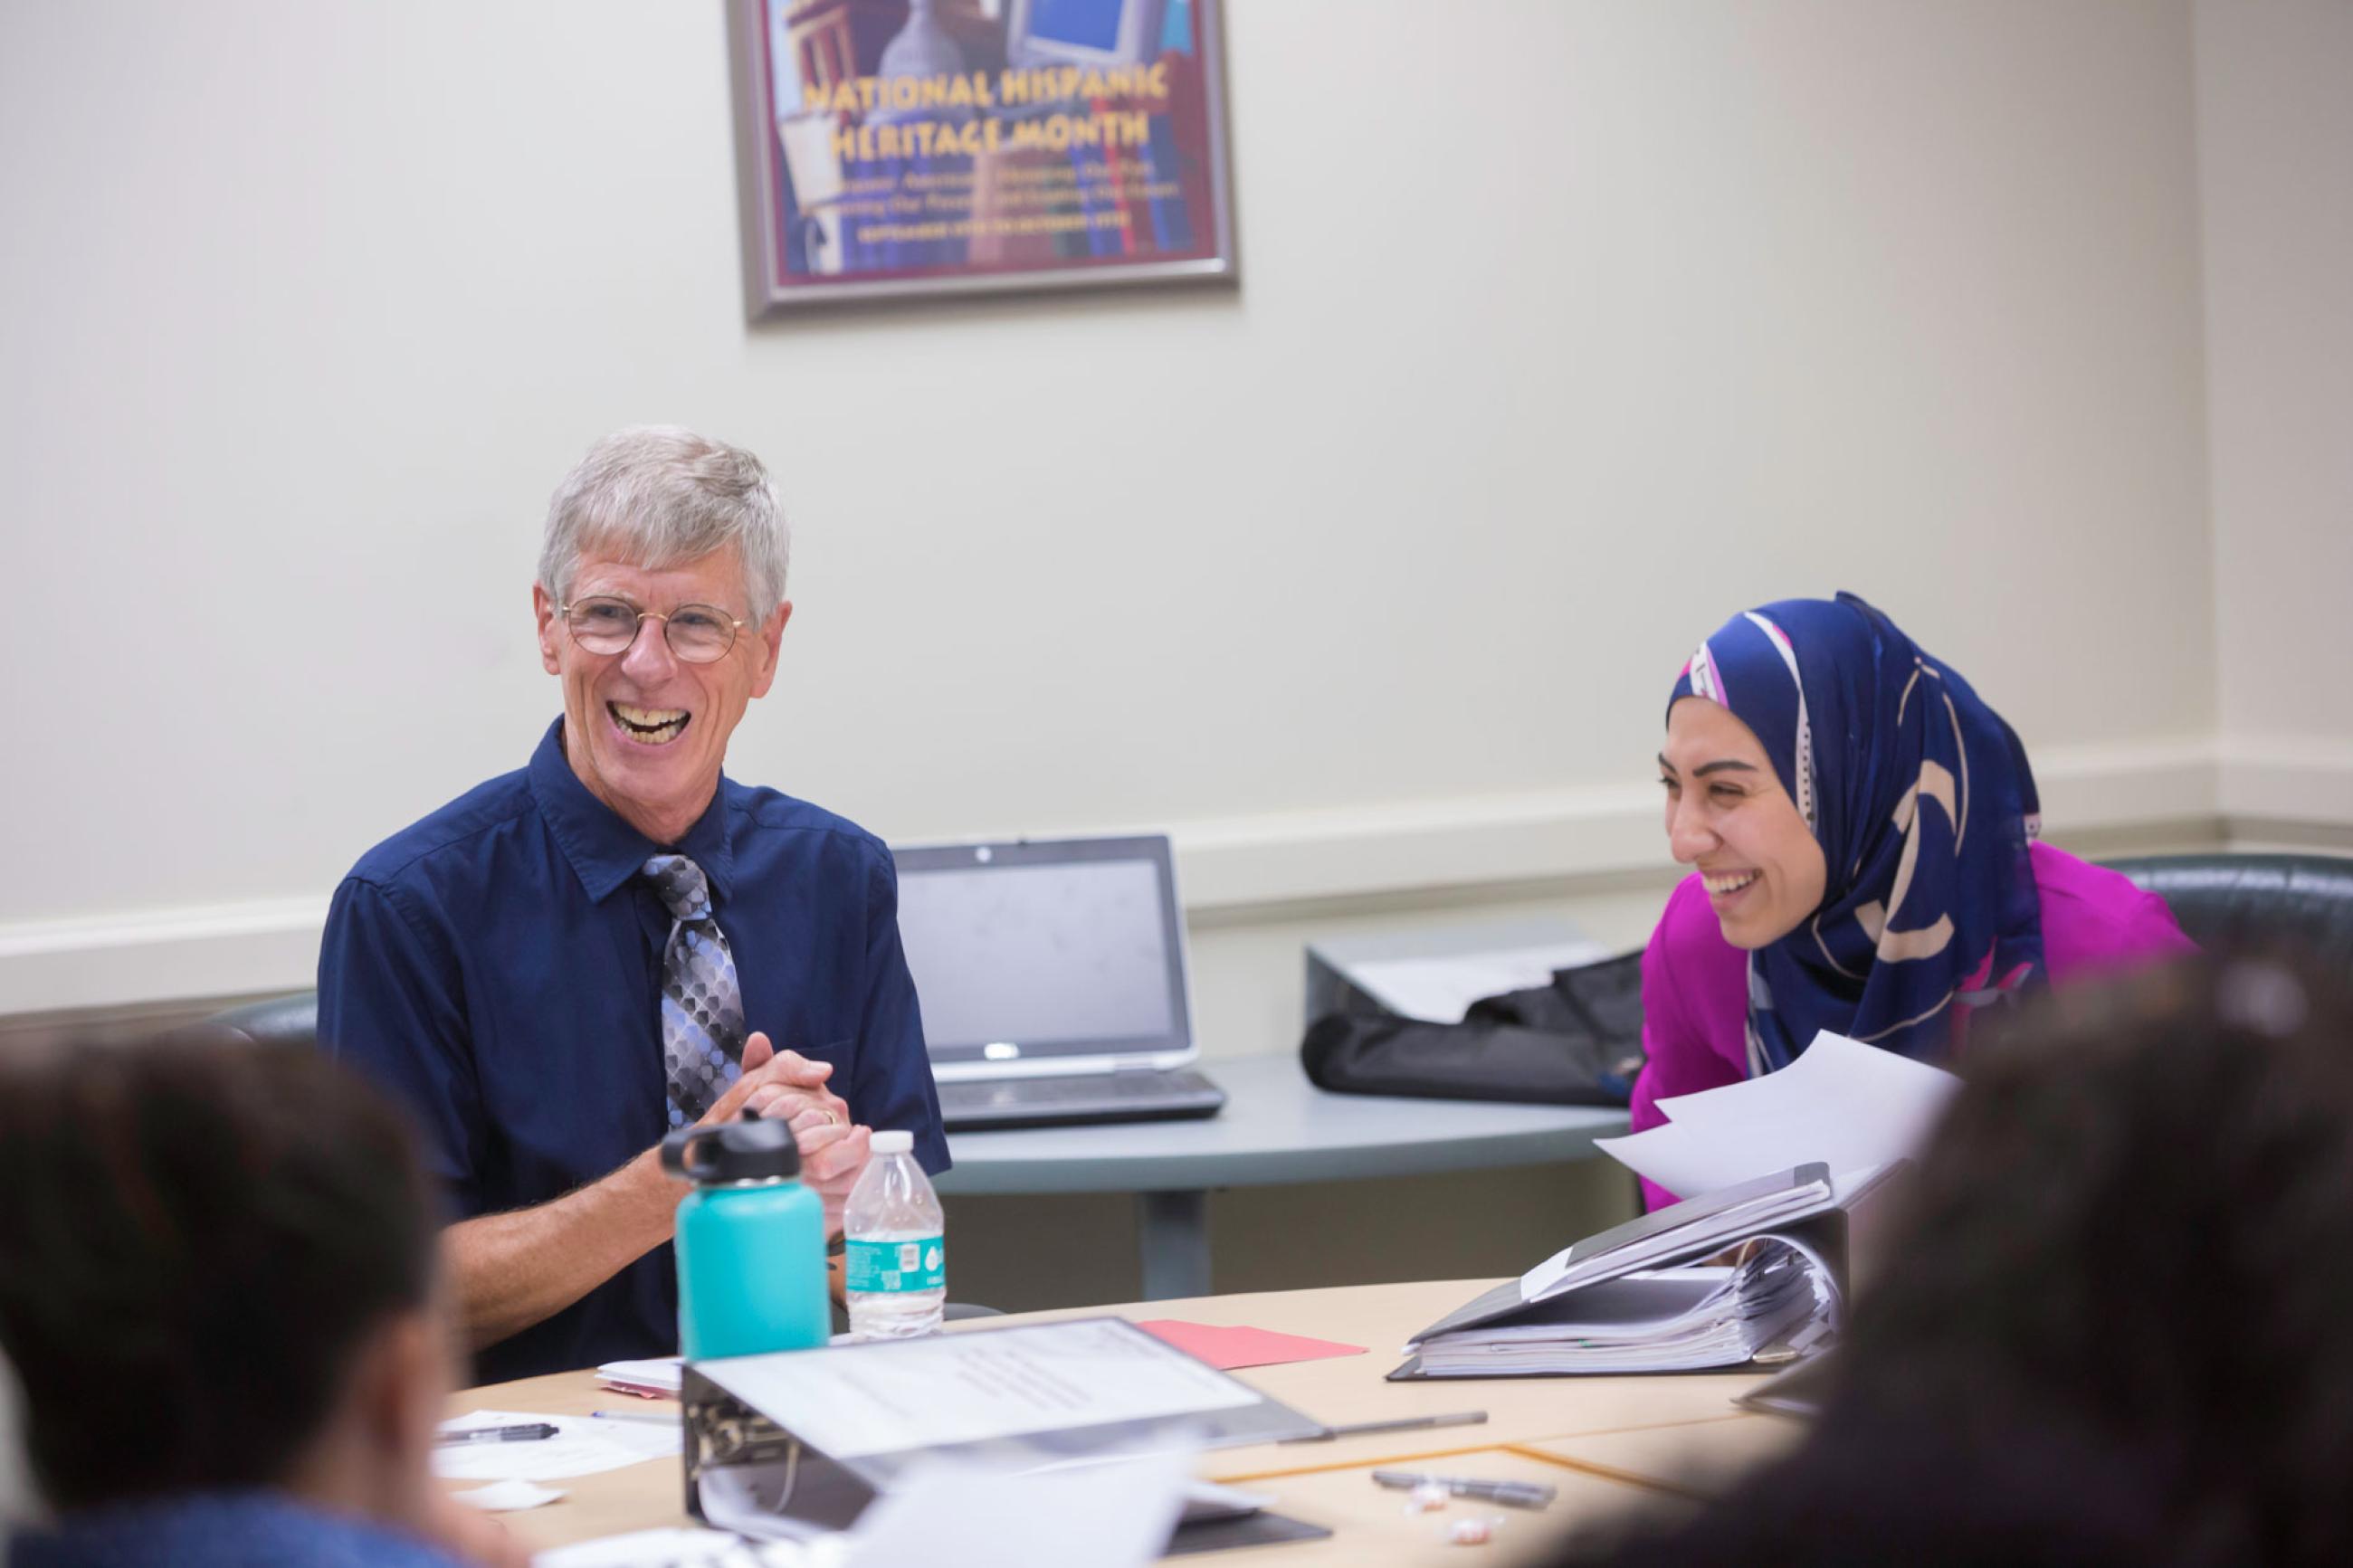 Faculty Walter Mullin laughs alongside a student in a classroom setting